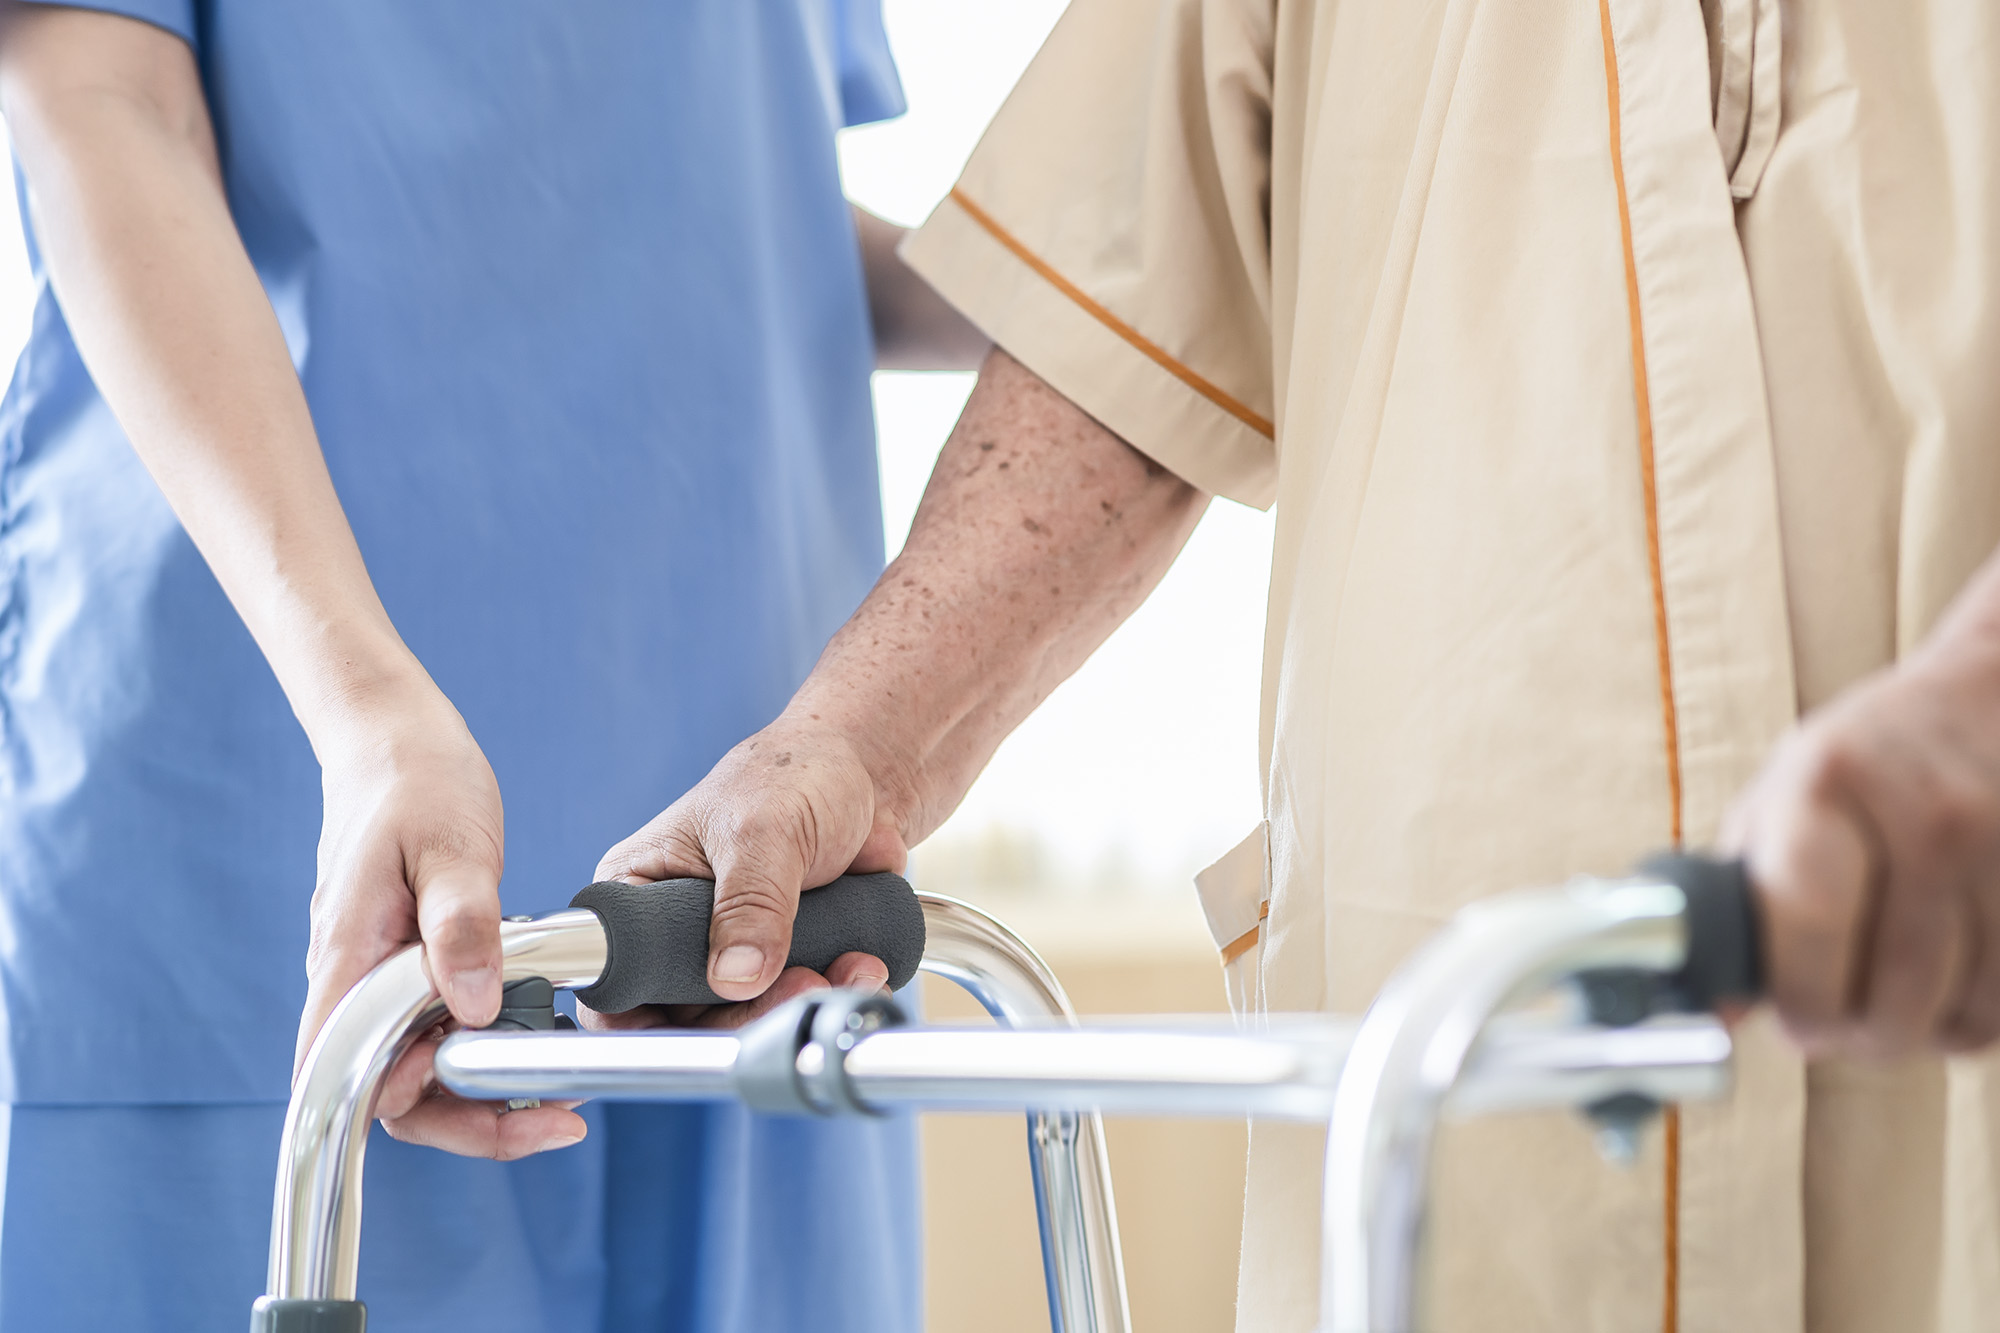 Healthcare professional helping an elderly person with a walker